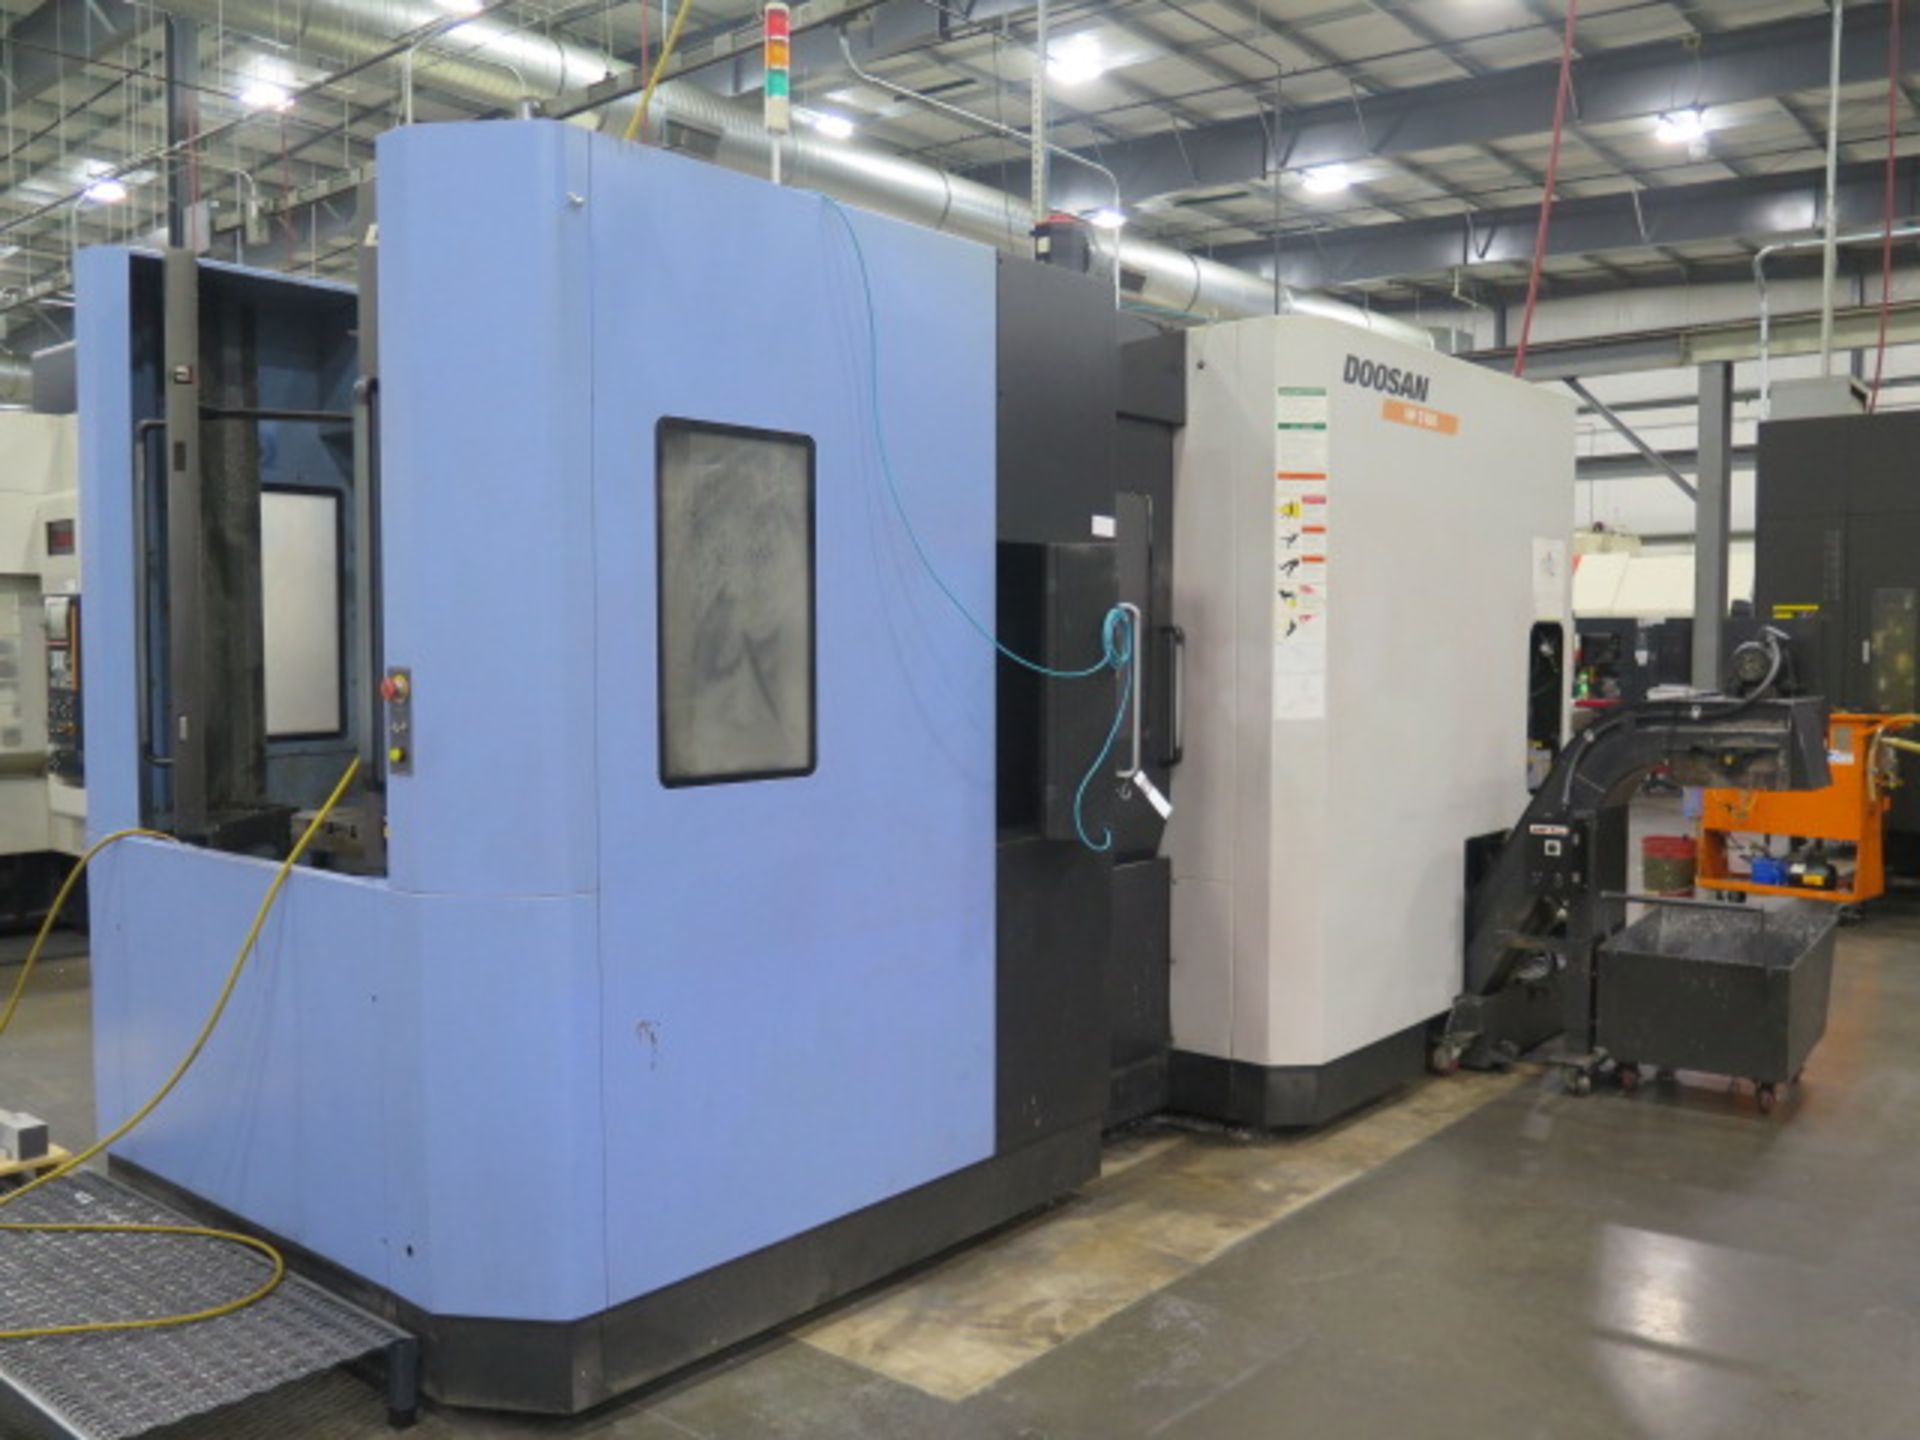 2008 Doosan HP5100 2-Pallet 4-Axis CNC Horizontal Machining Center s/n HP510161, SOLD AS IS - Image 2 of 24